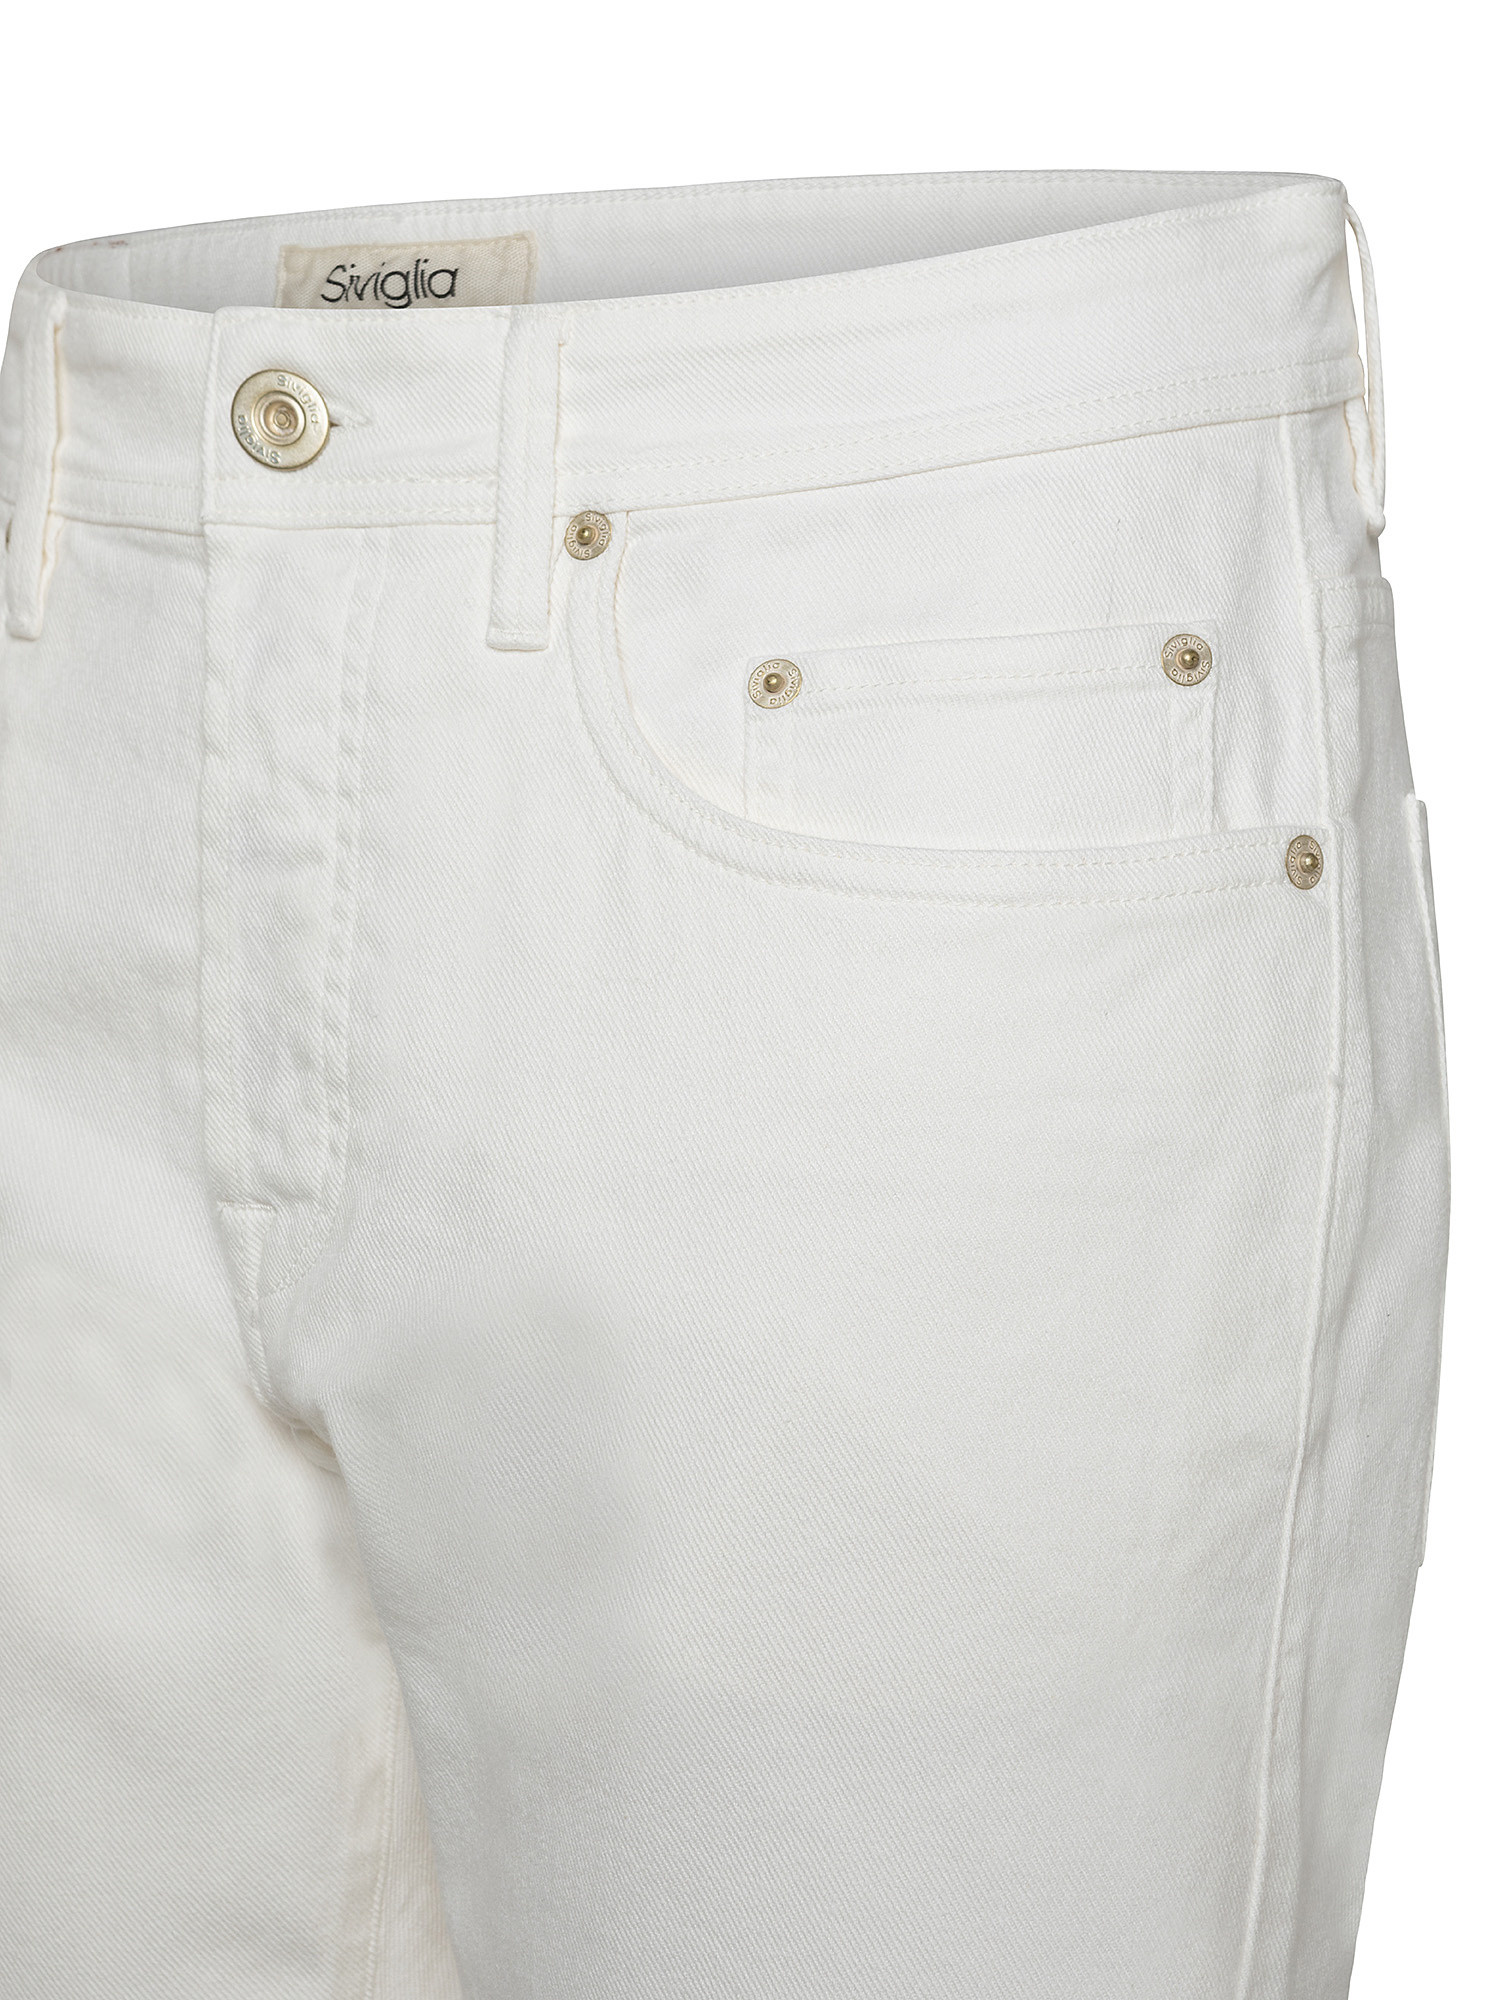 Denim trousers, White, large image number 2